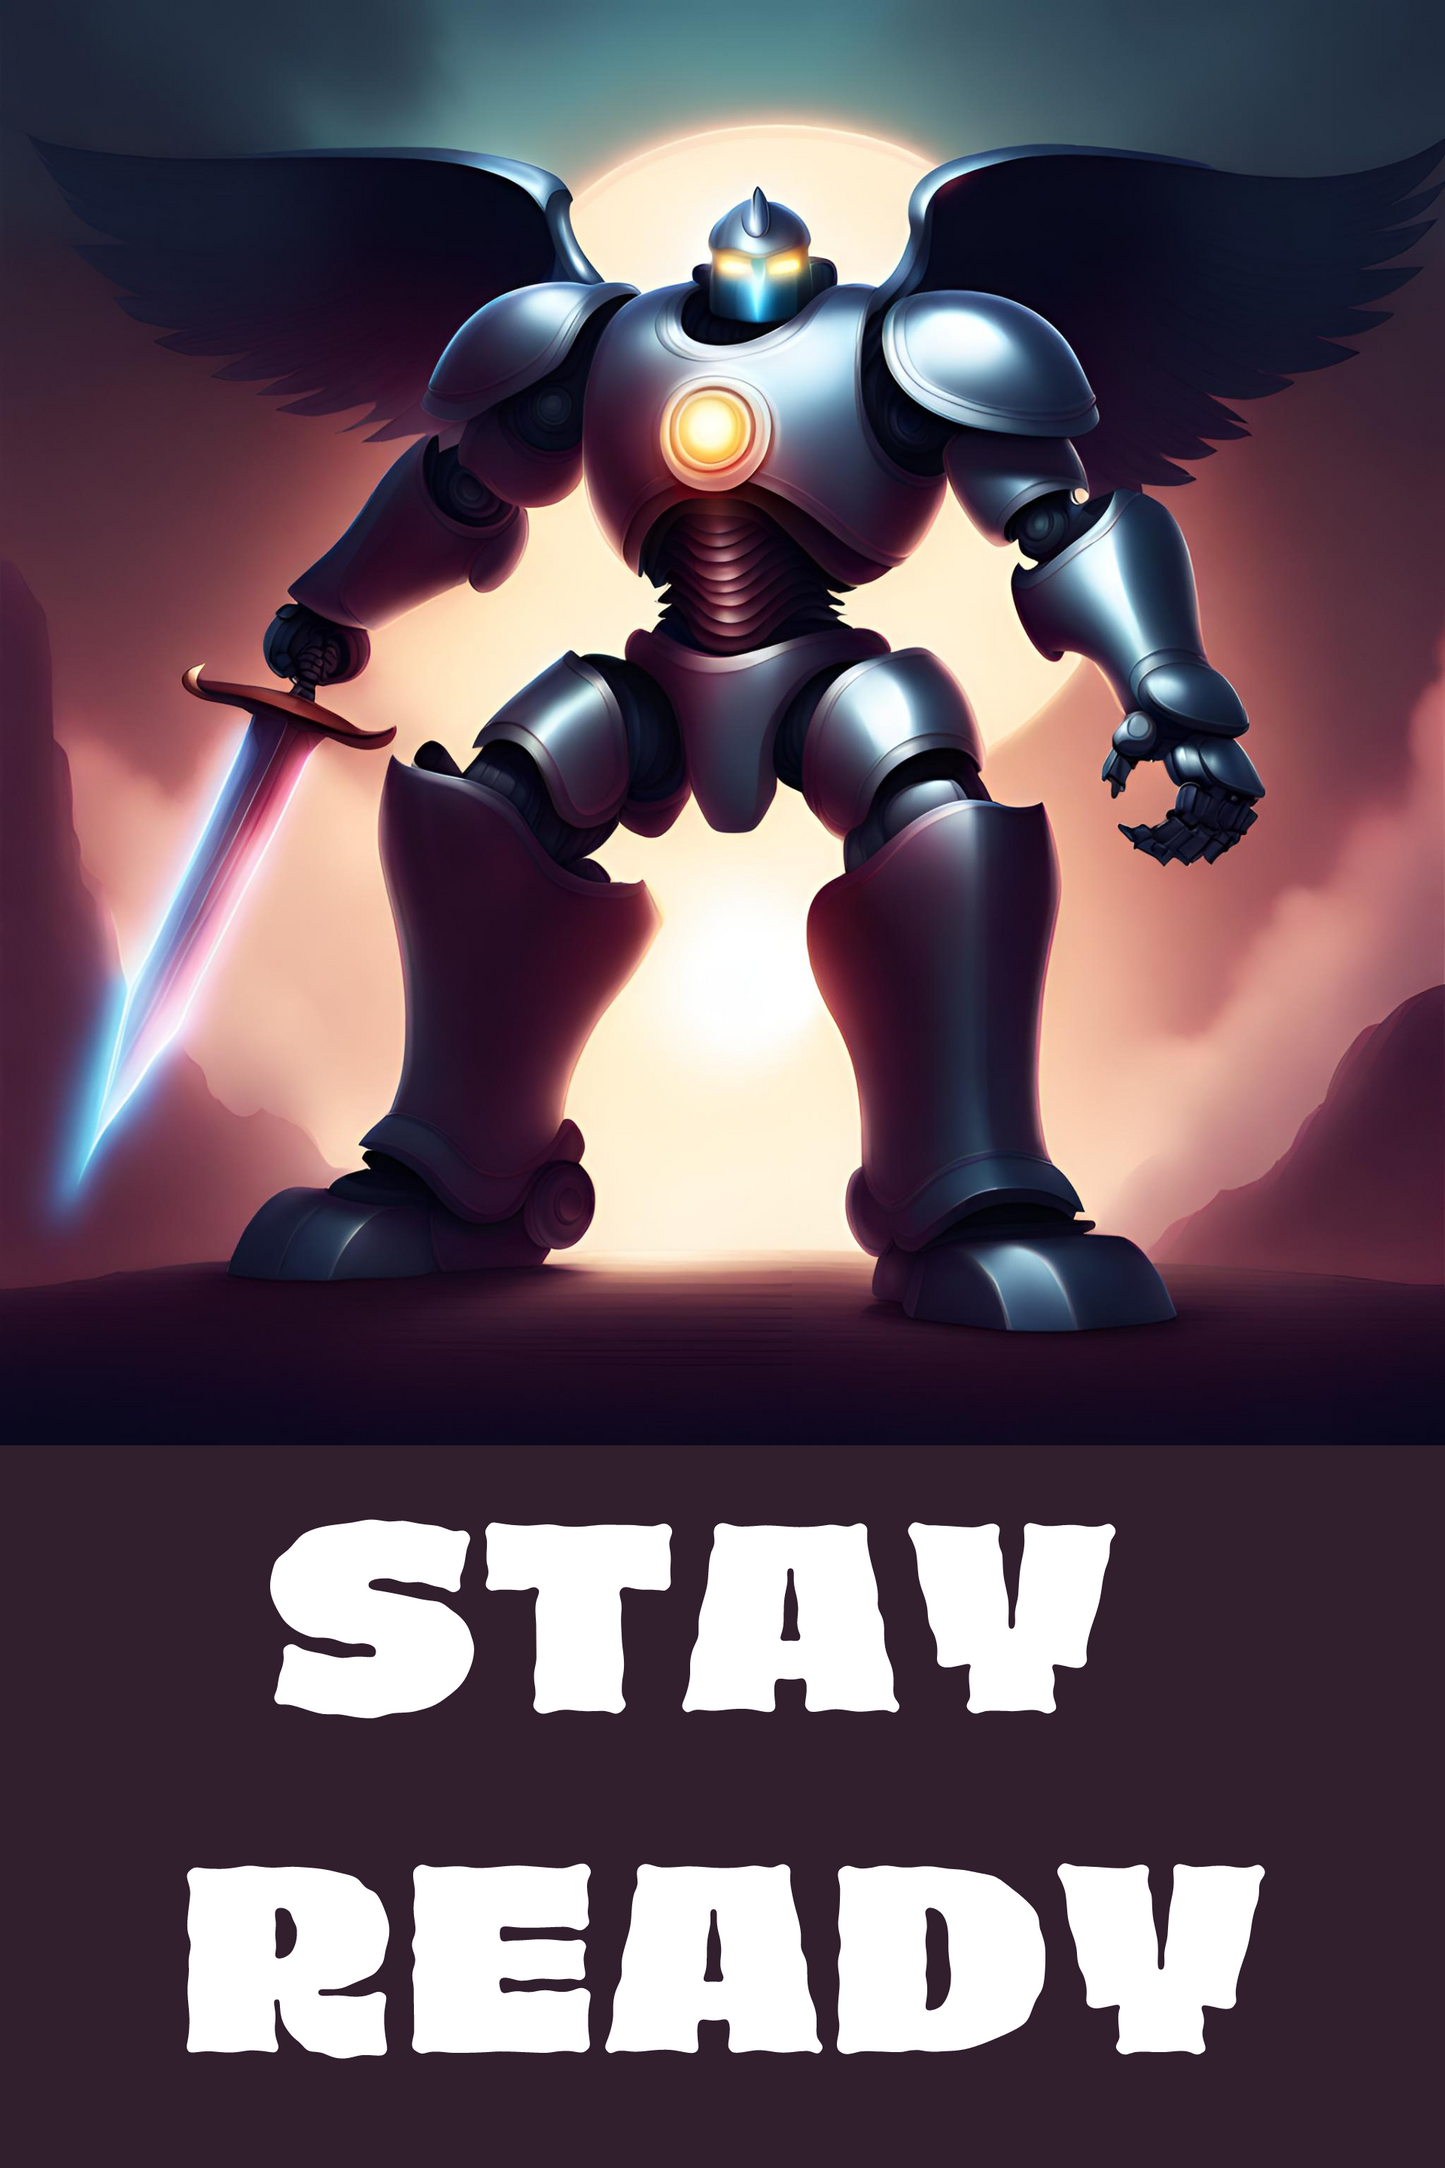 Stay Ready Printed Poster